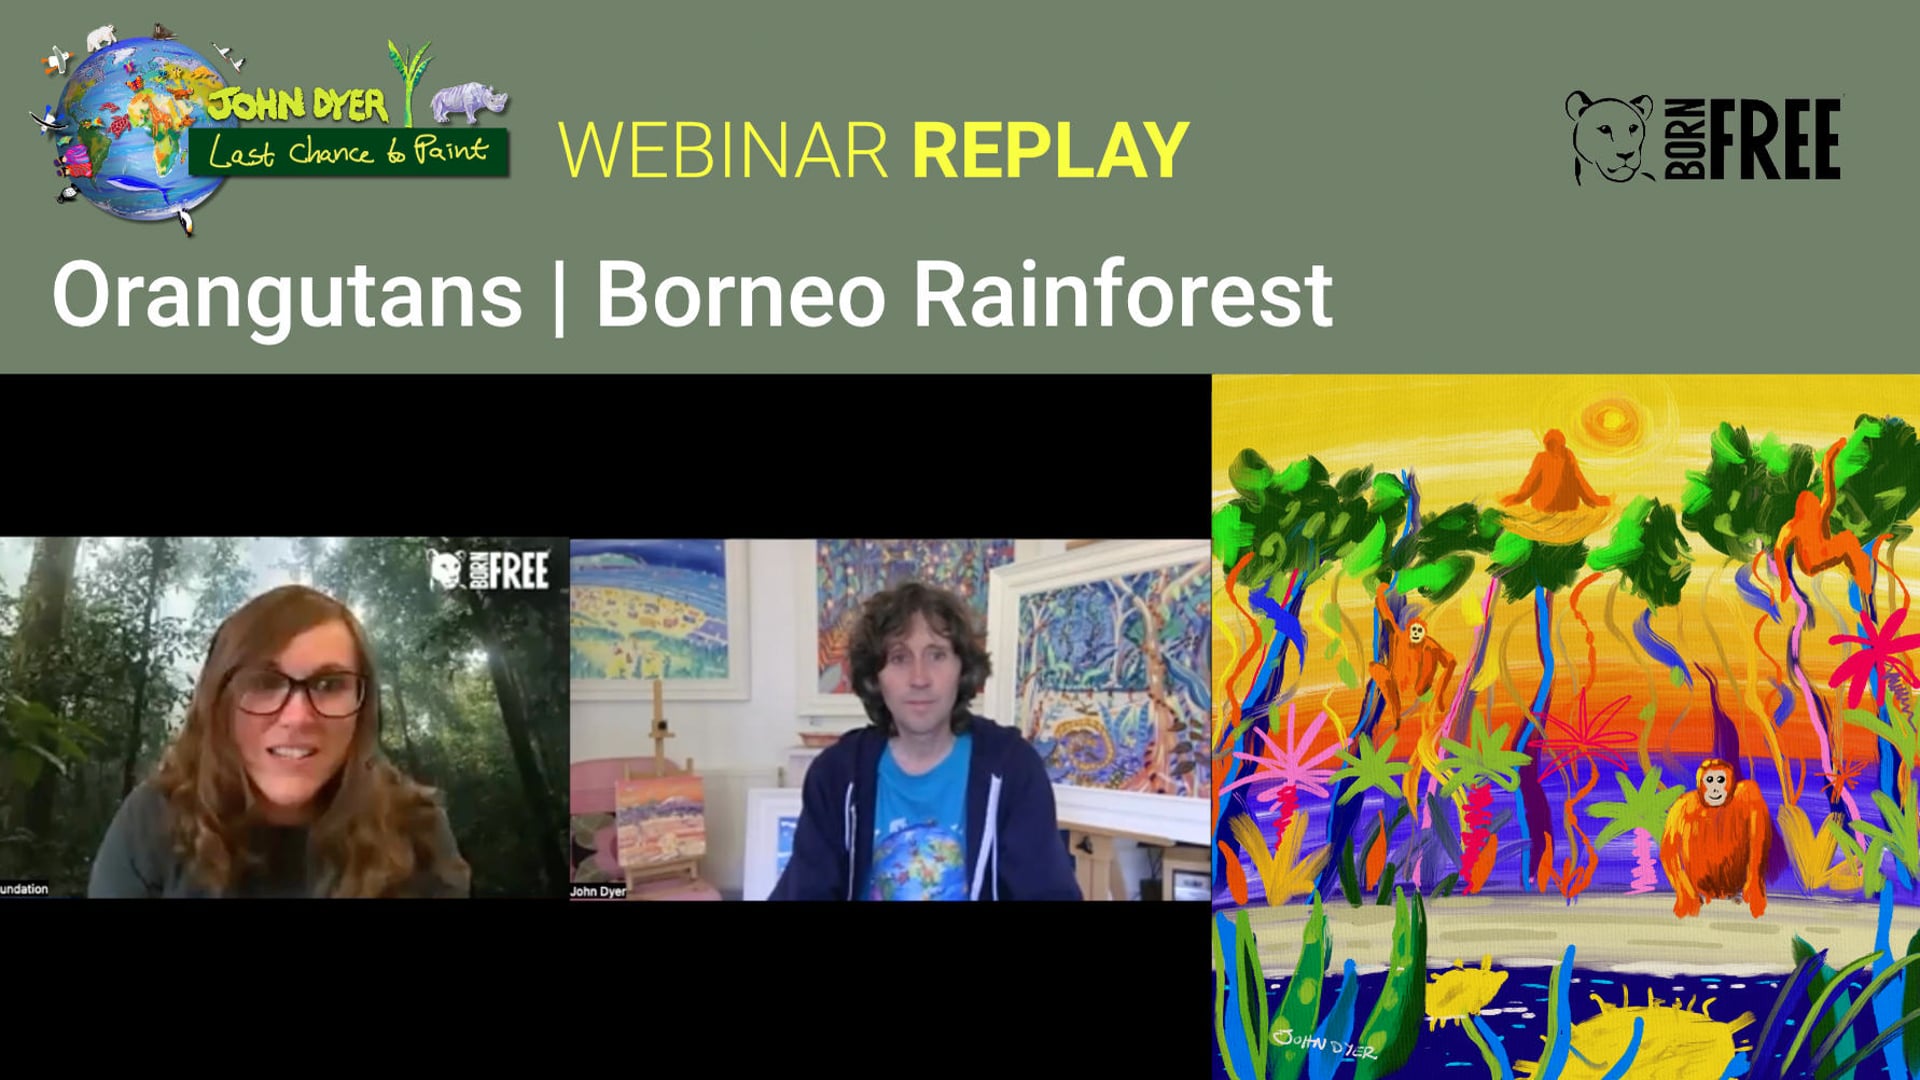 Paint and learn about orangutans in the Borneo rainforest